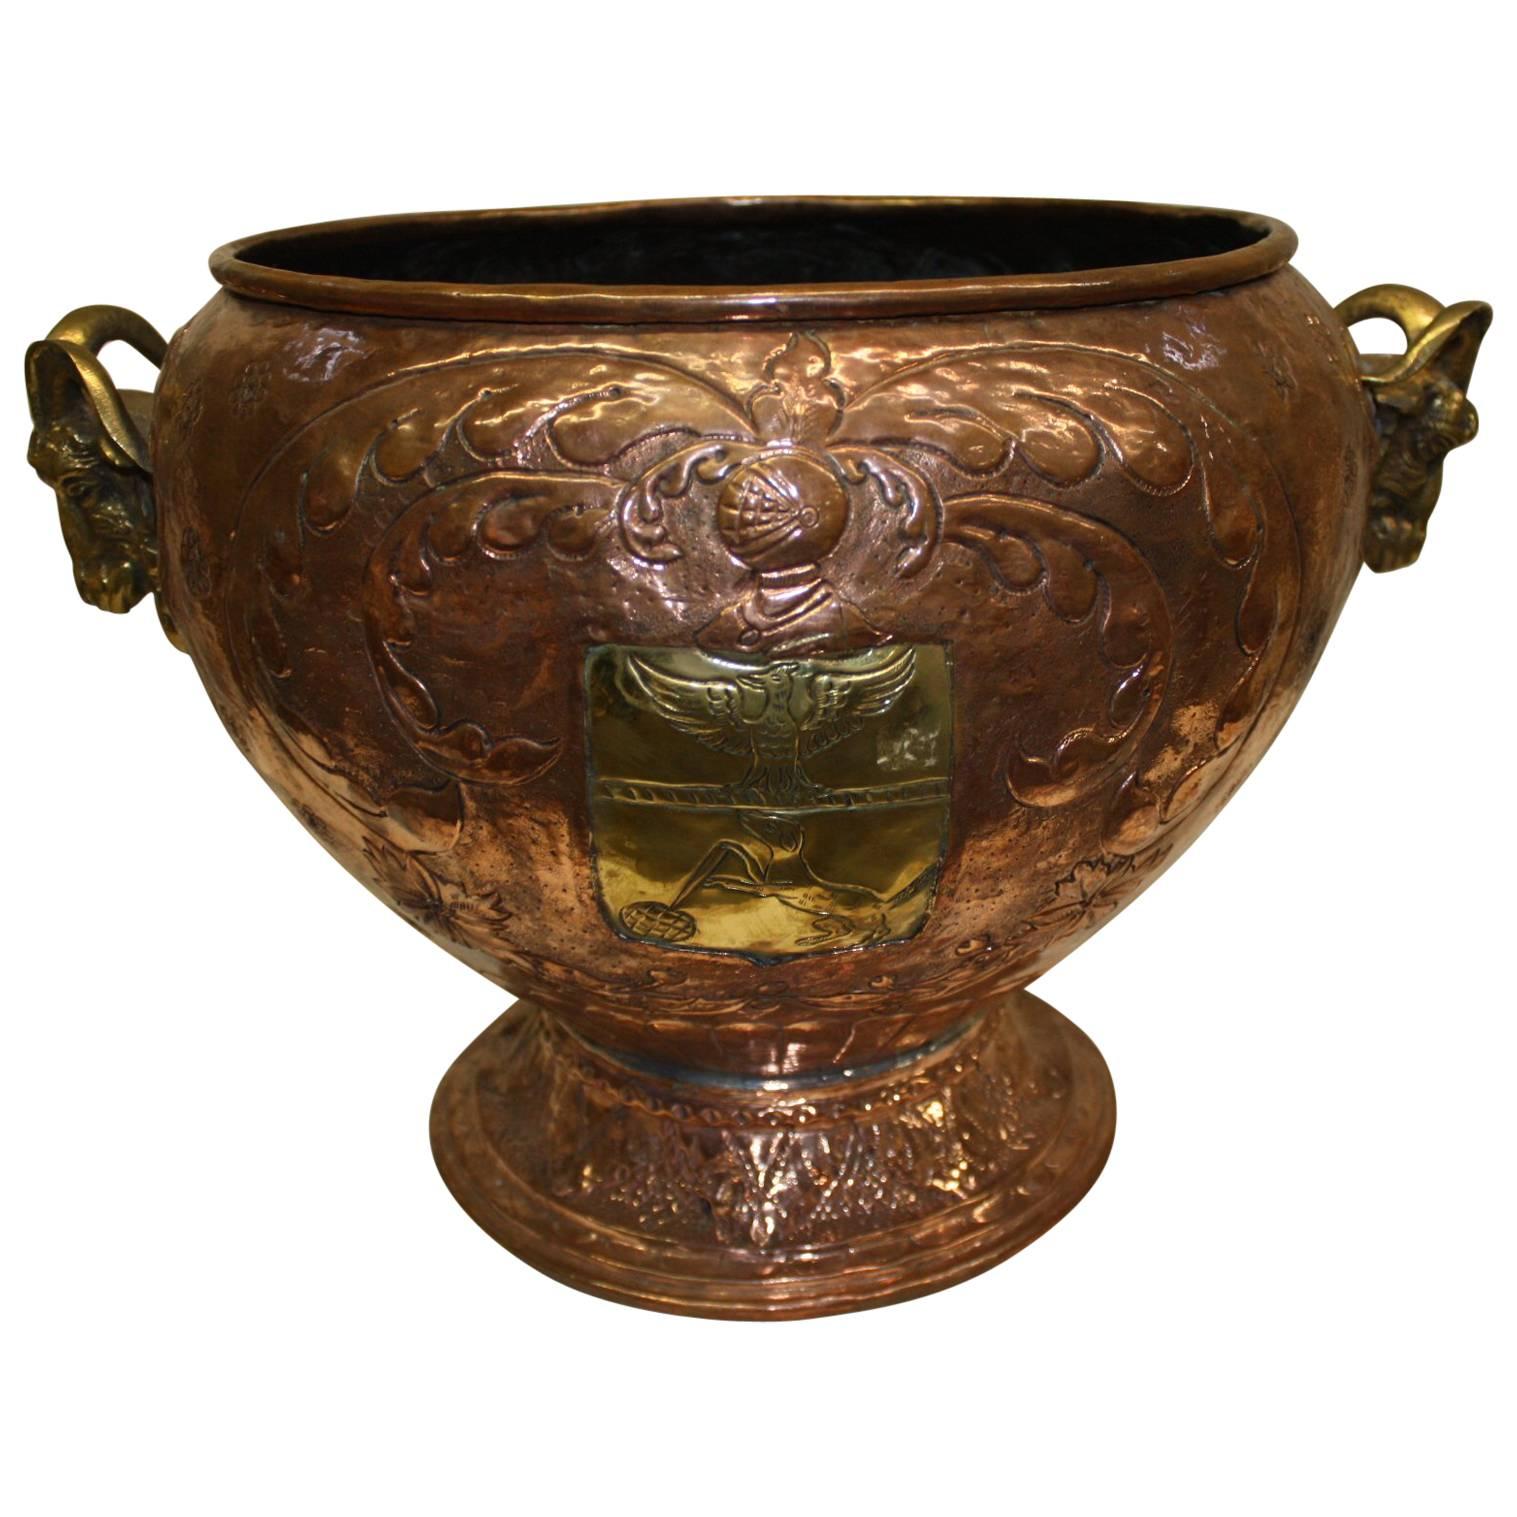 19th Century French Copper Urn